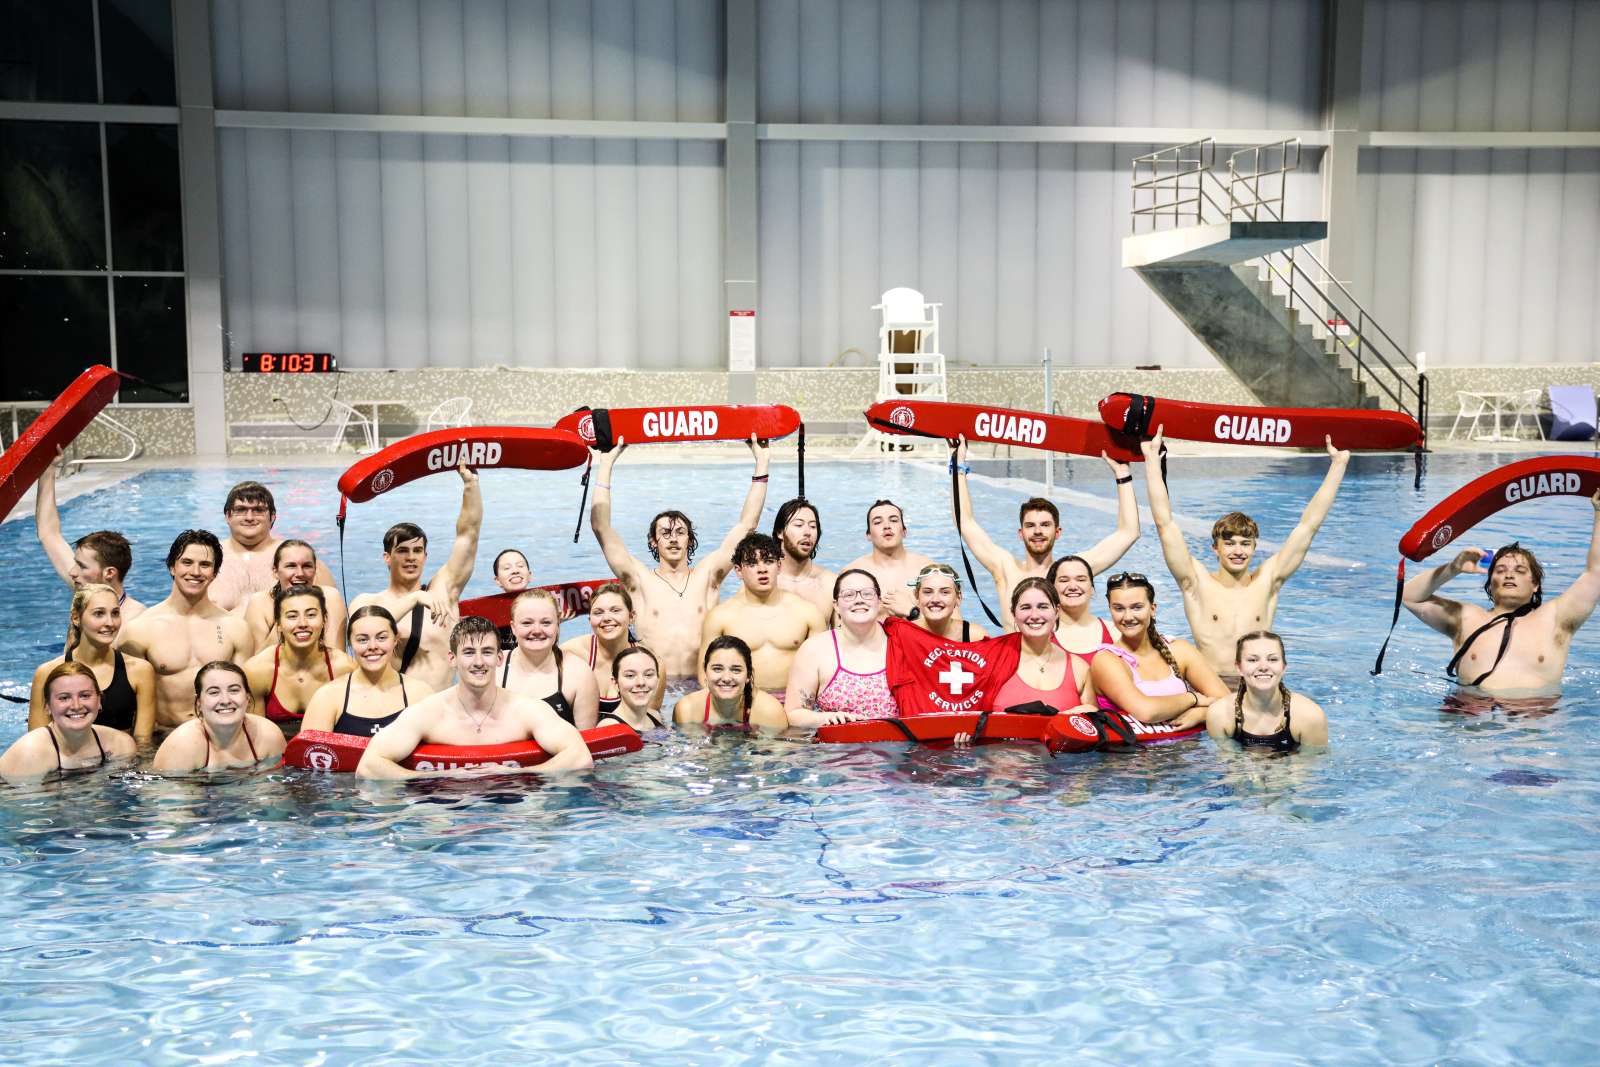 a group photo of the lifeguards